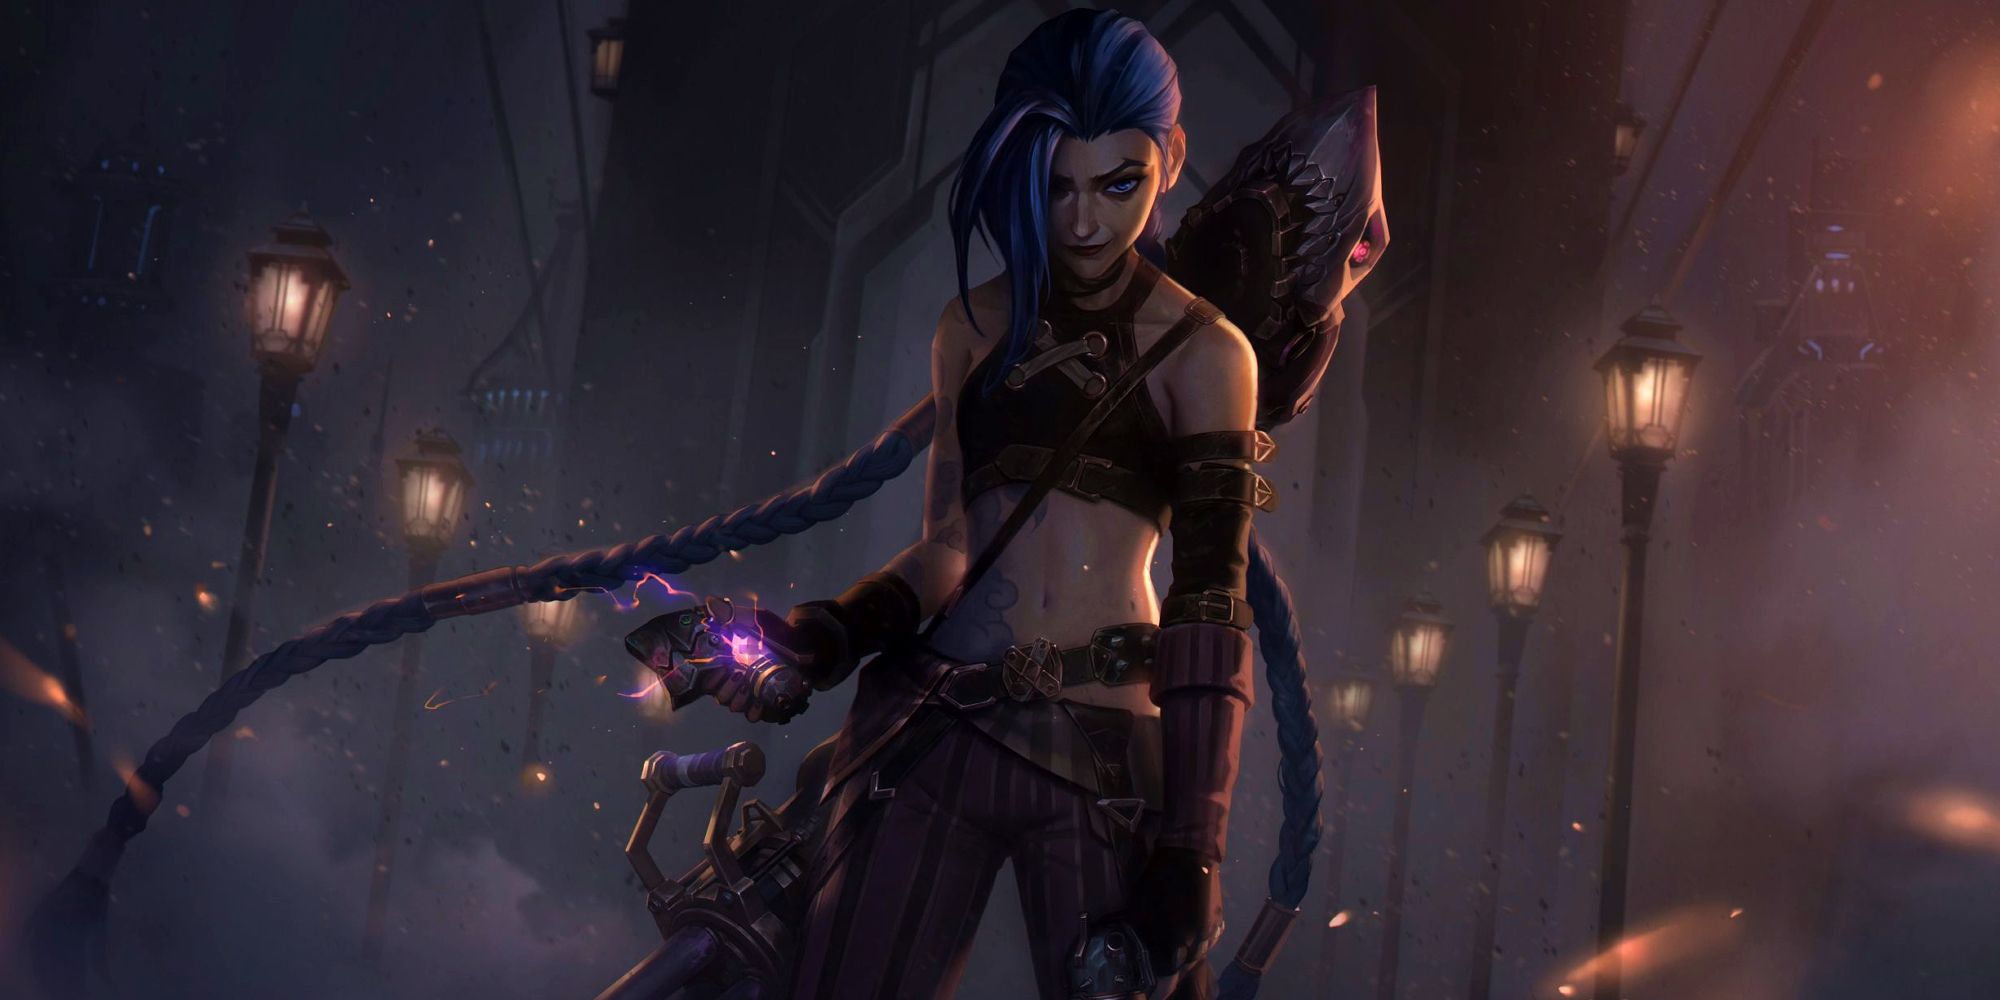 An image of Jinx from League of Legends with her Arcane skin.